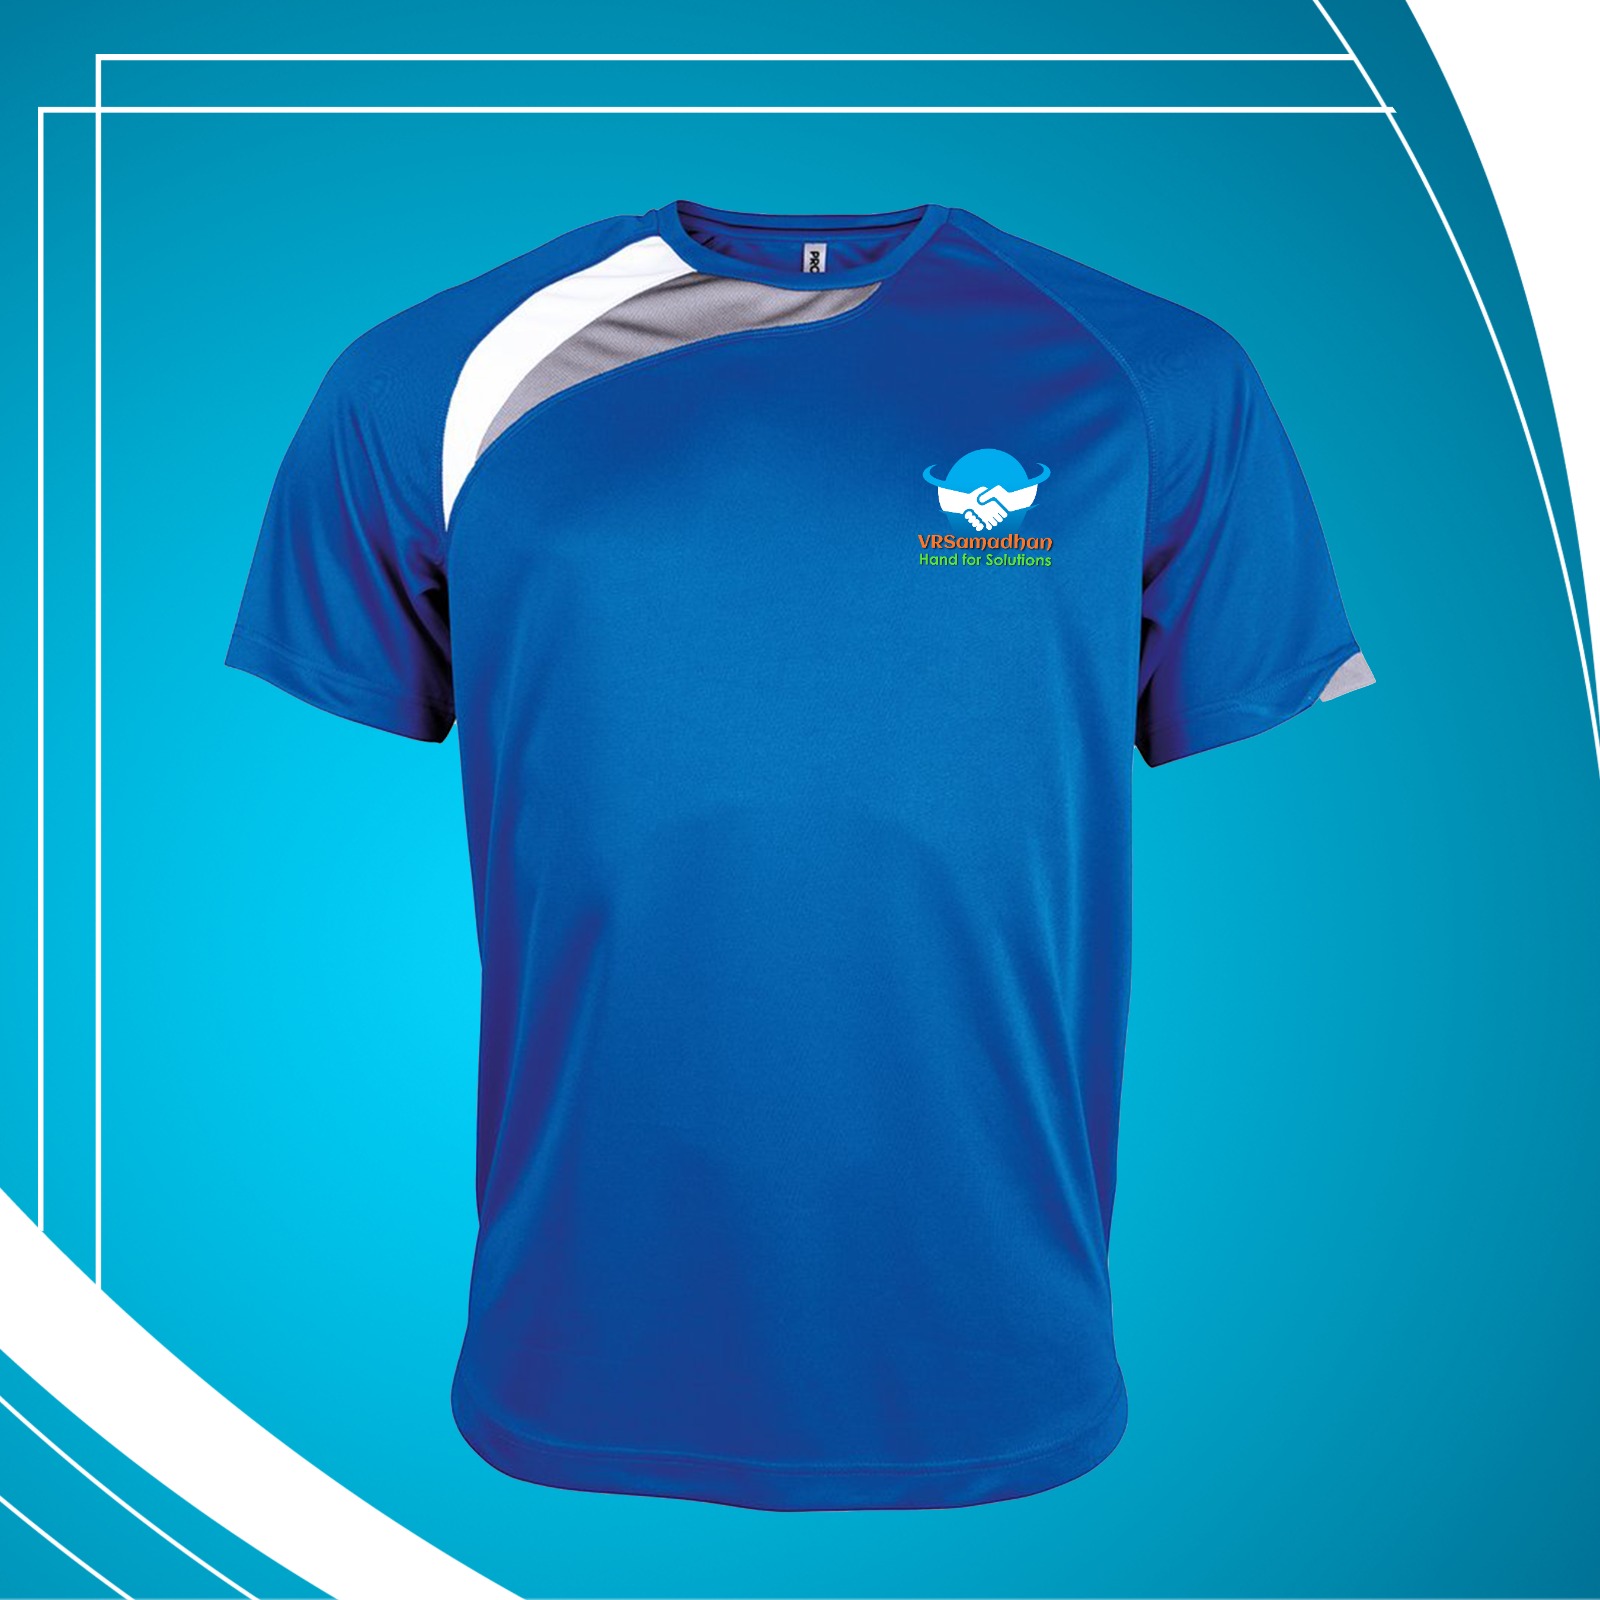 PROMOTIONAL SPORTS T-SHIRTS